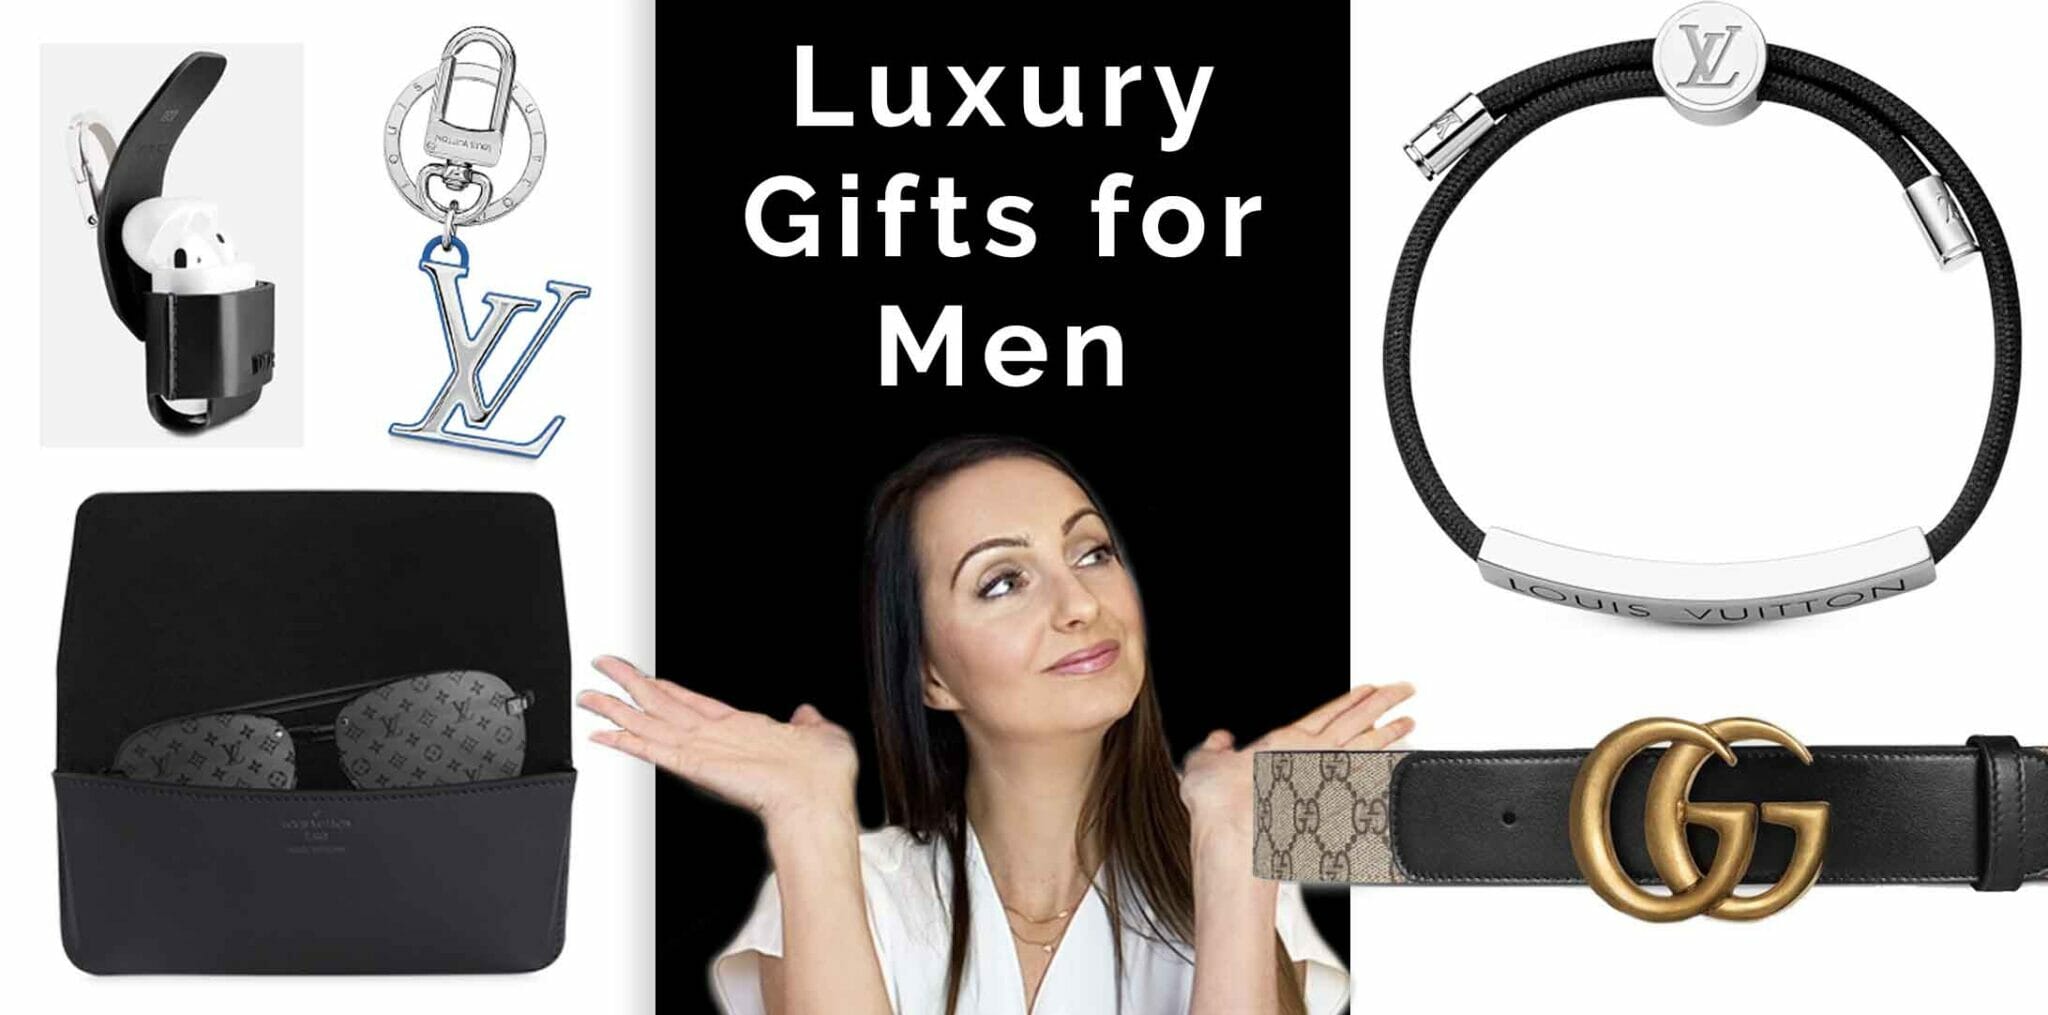 Luxury Gifts For Men  What Are The Best Luxury Gifts For The Man